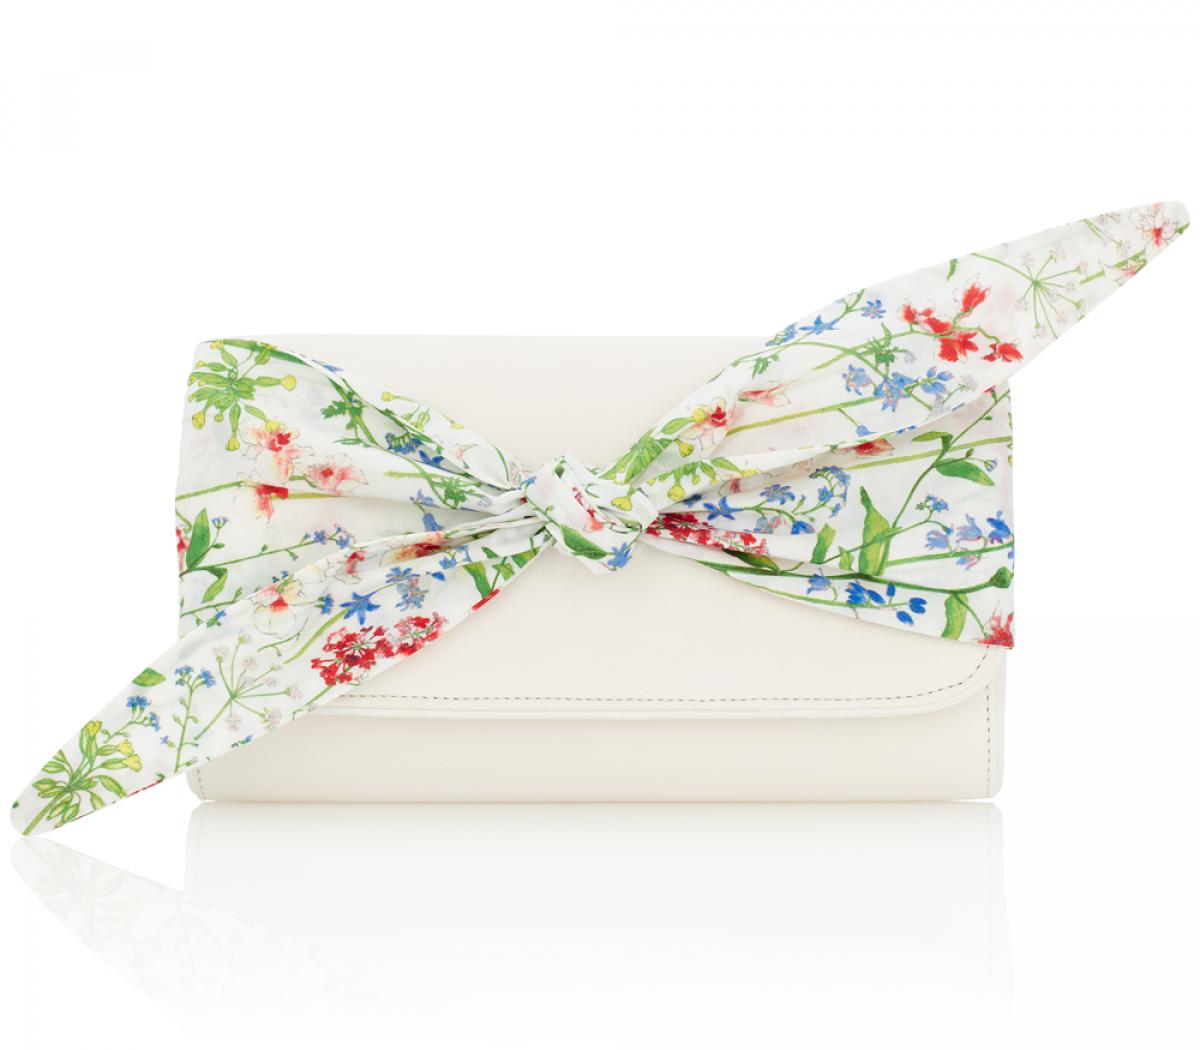 FLORENCE MEADOW CLUTCH